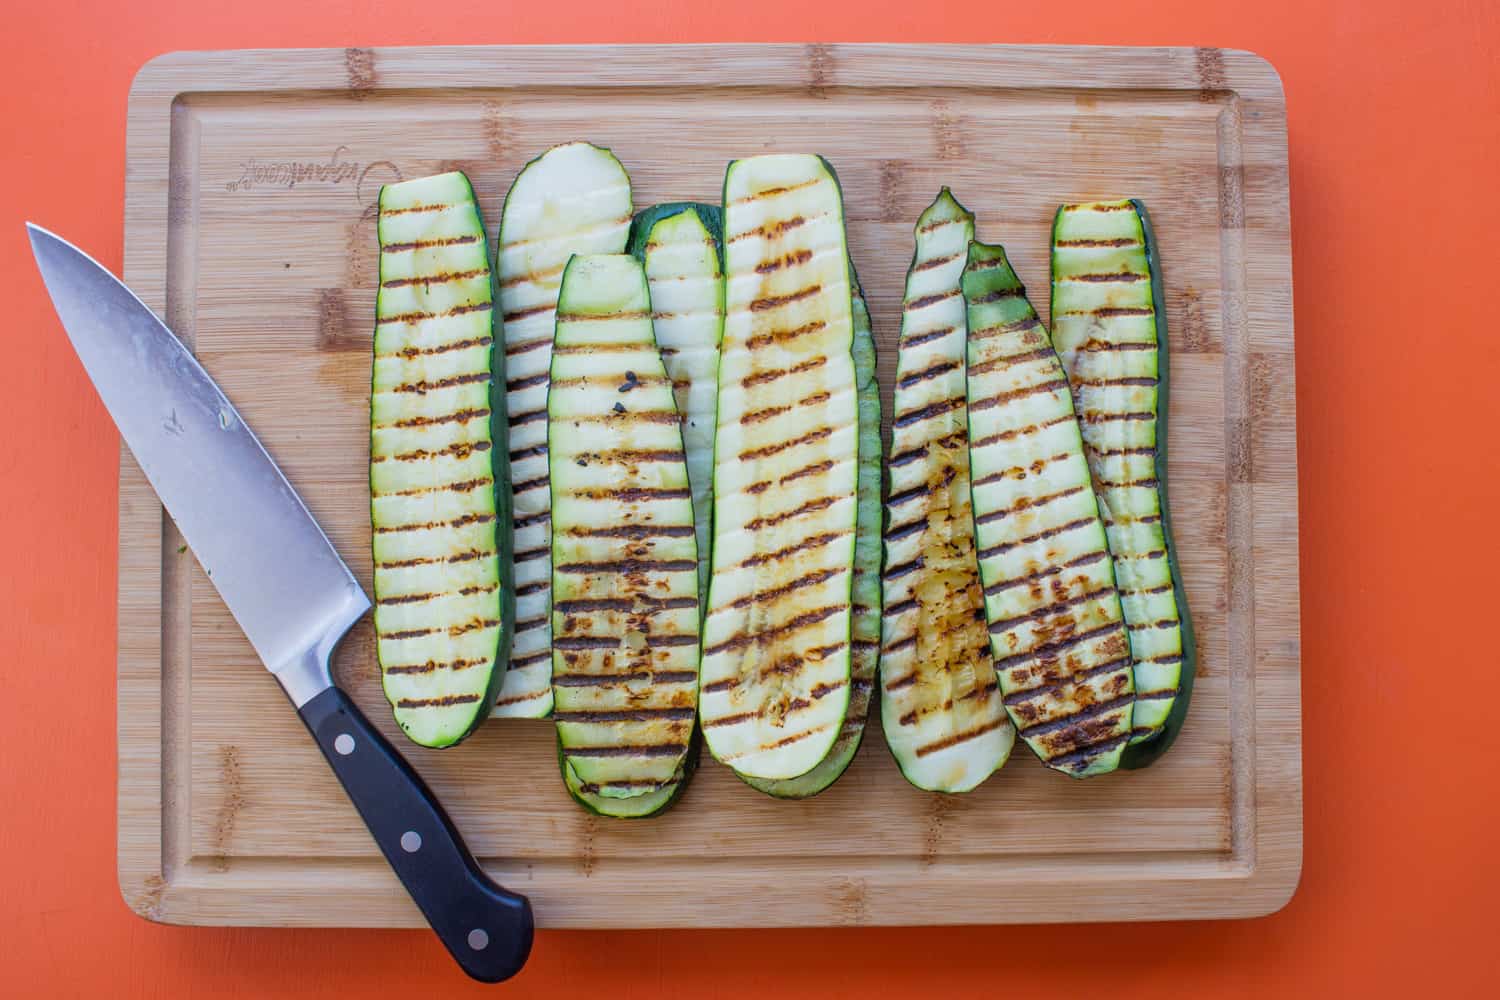 Roasted and charred courgette strips on a chopping board with a knife.